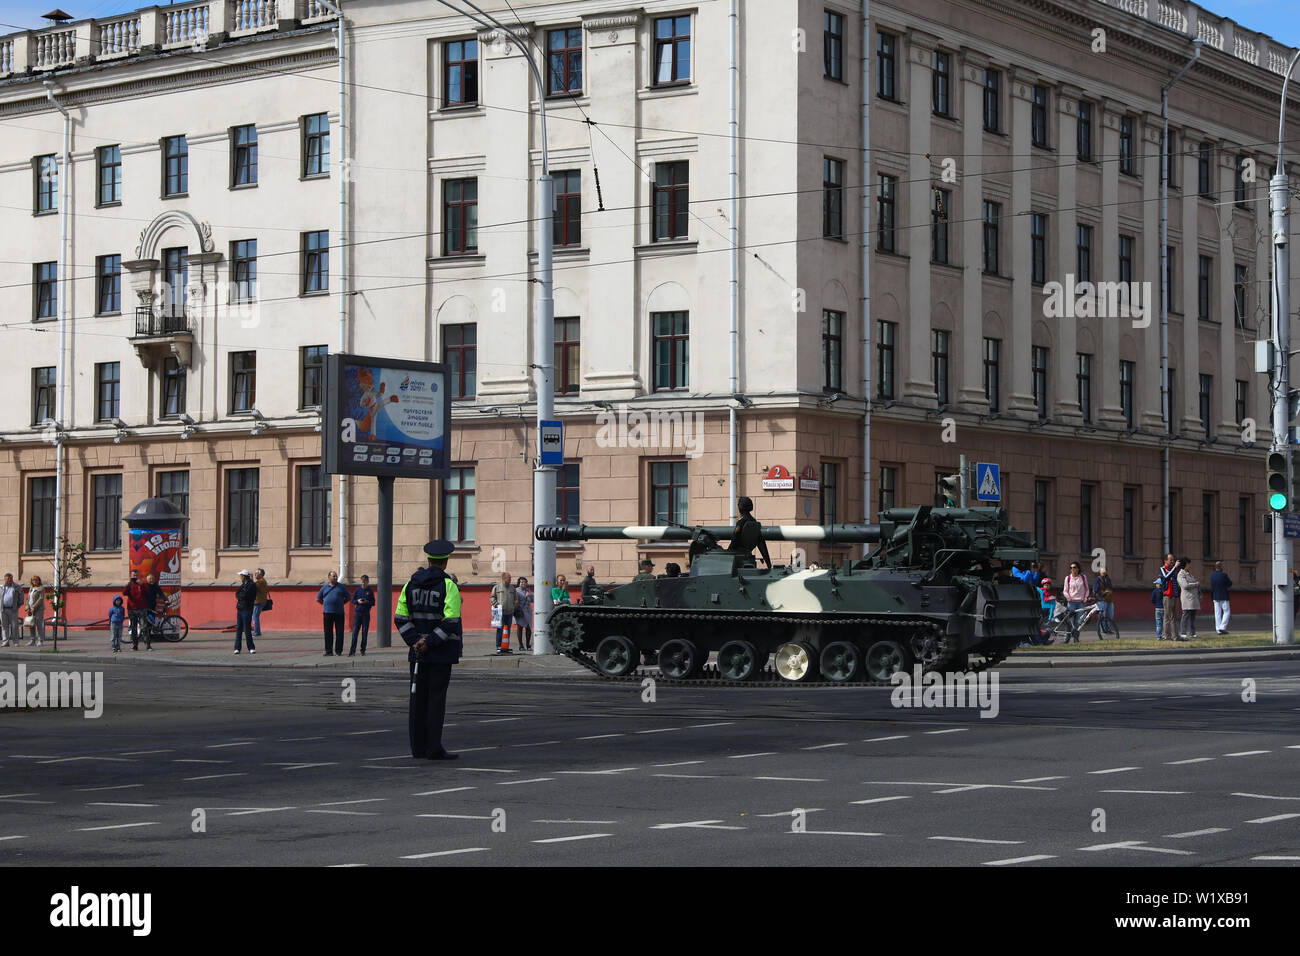 Minsk, Belarus - July 3, 2019: military vehicles on its way to the parade of the Independence Day of Belarus on July 3rd. Tanks in the city center. Stock Photo